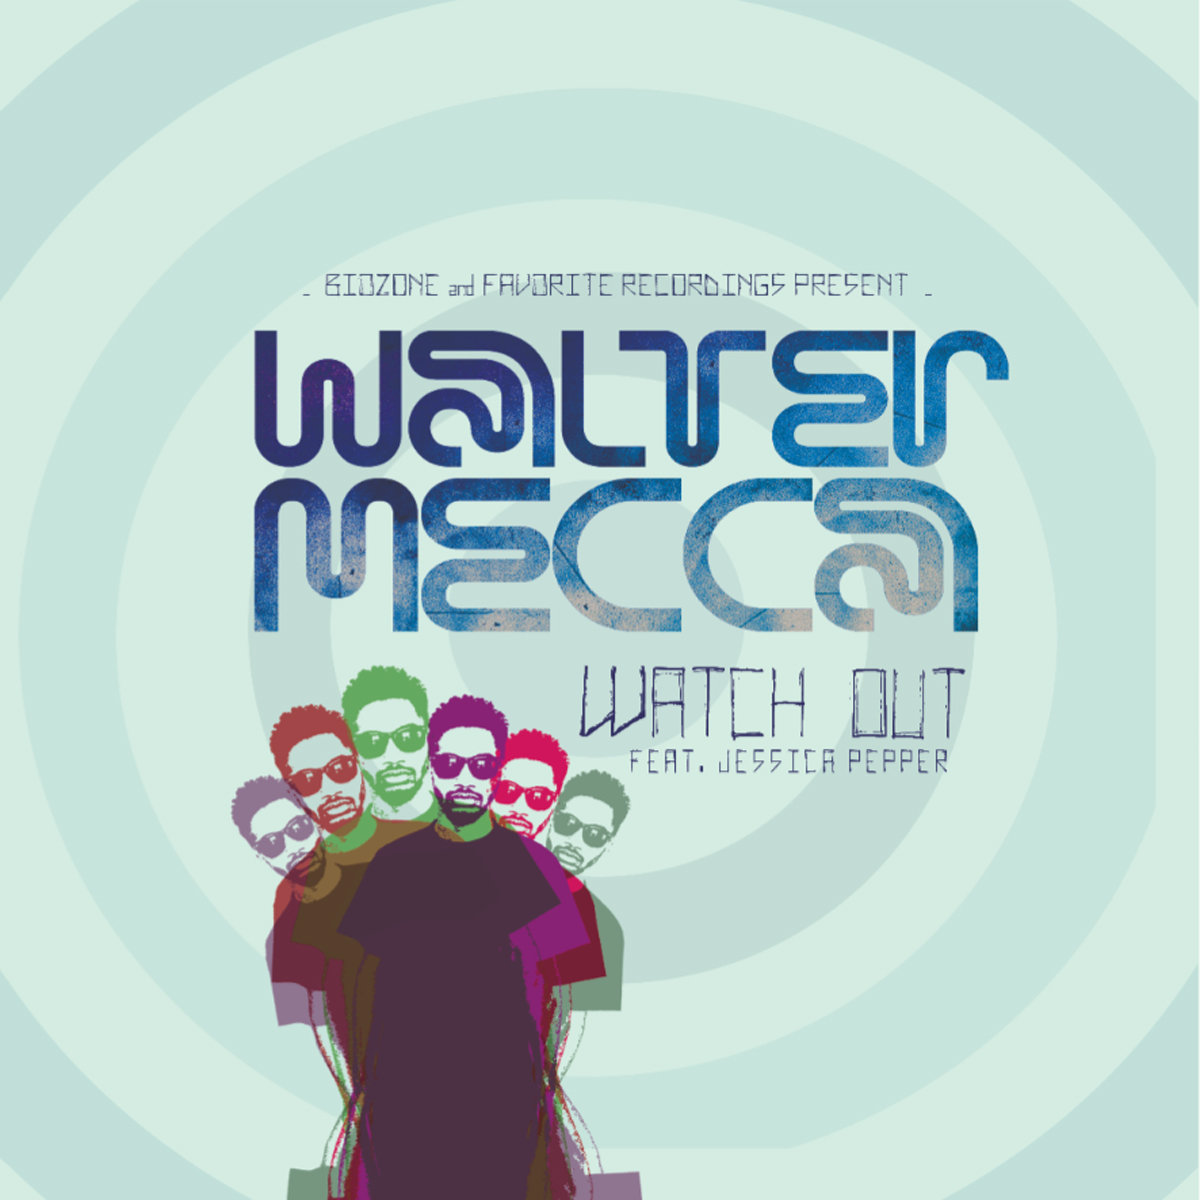 Walter Mecca. Jessica Pepper. Watch out for this